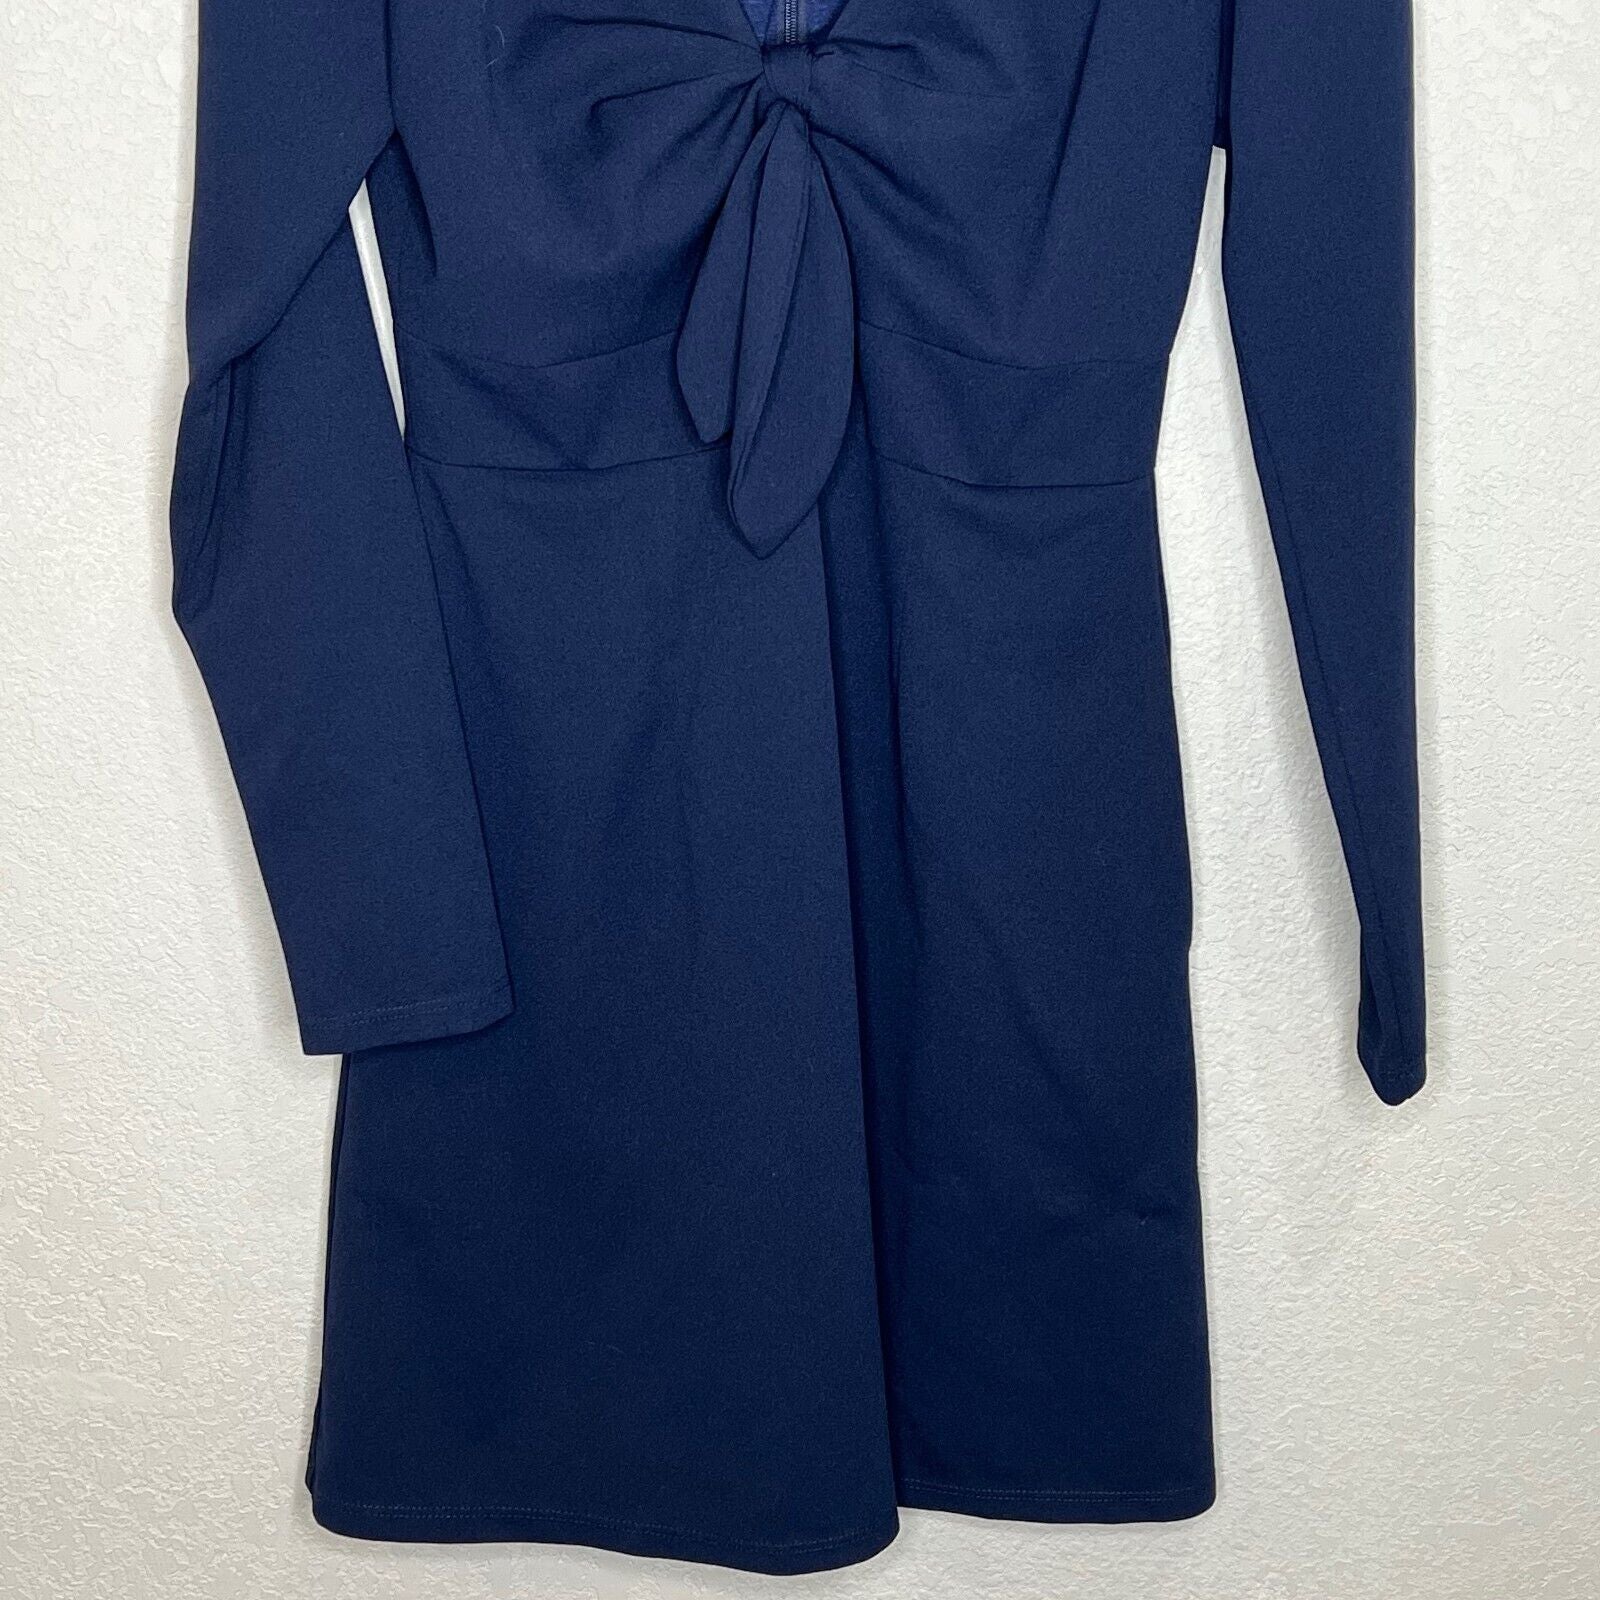 Anthropologie Hutch Navy Blue Tie Front Long Sleeve Dress Small / X Small